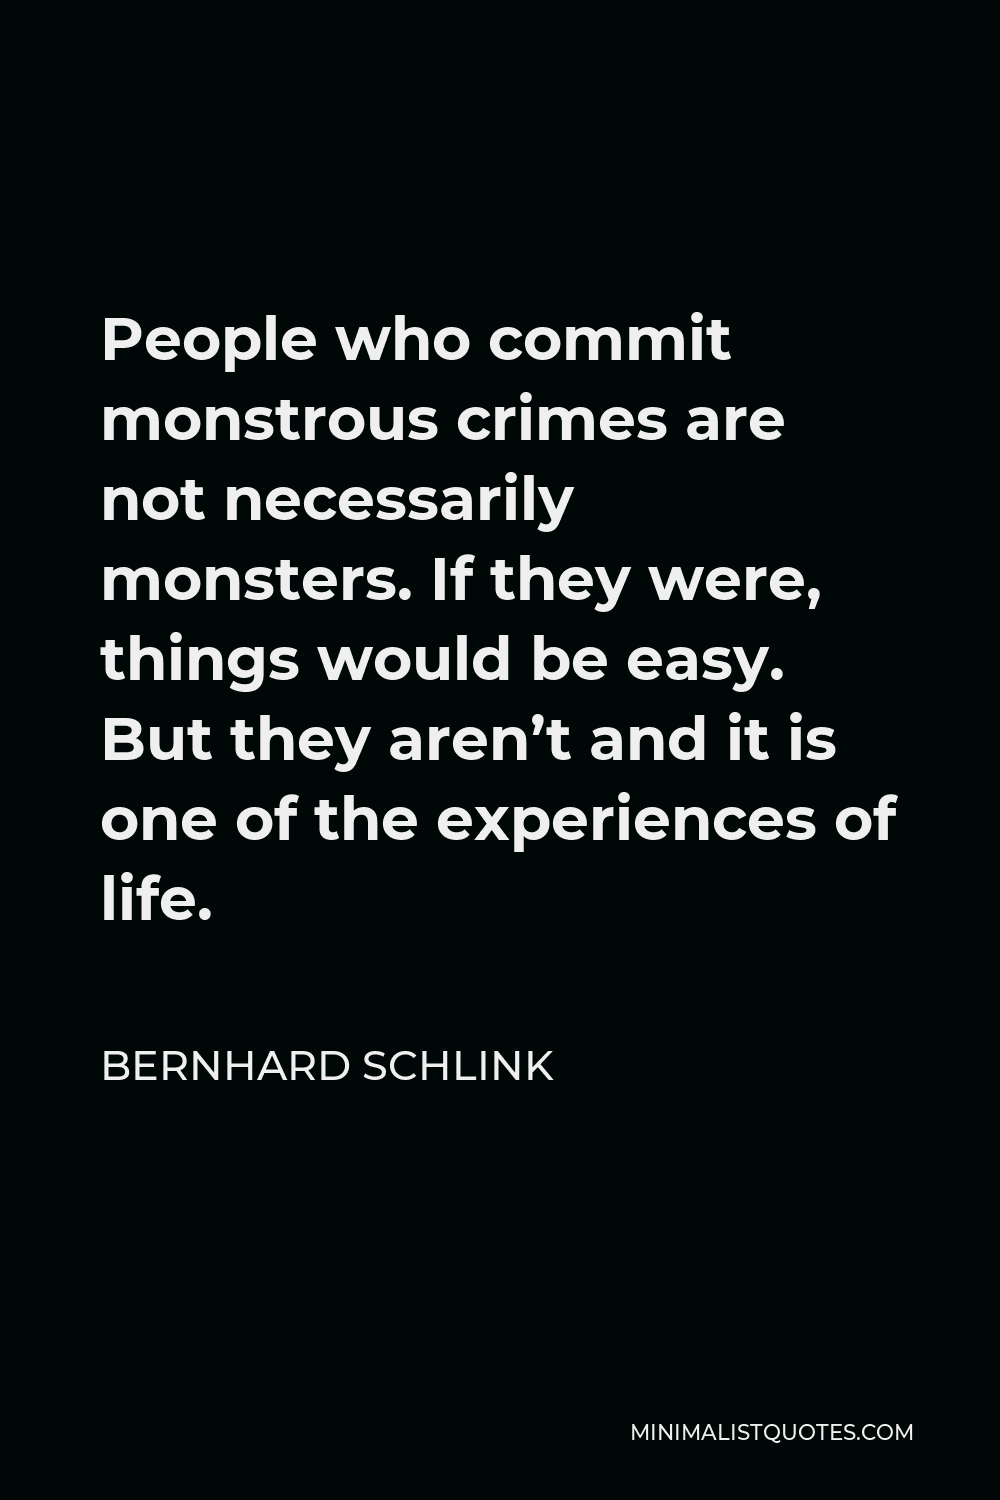 Bernhard Schlink Quote - People who commit monstrous crimes are not necessarily monsters. If they were, things would be easy. But they aren’t and it is one of the experiences of life.